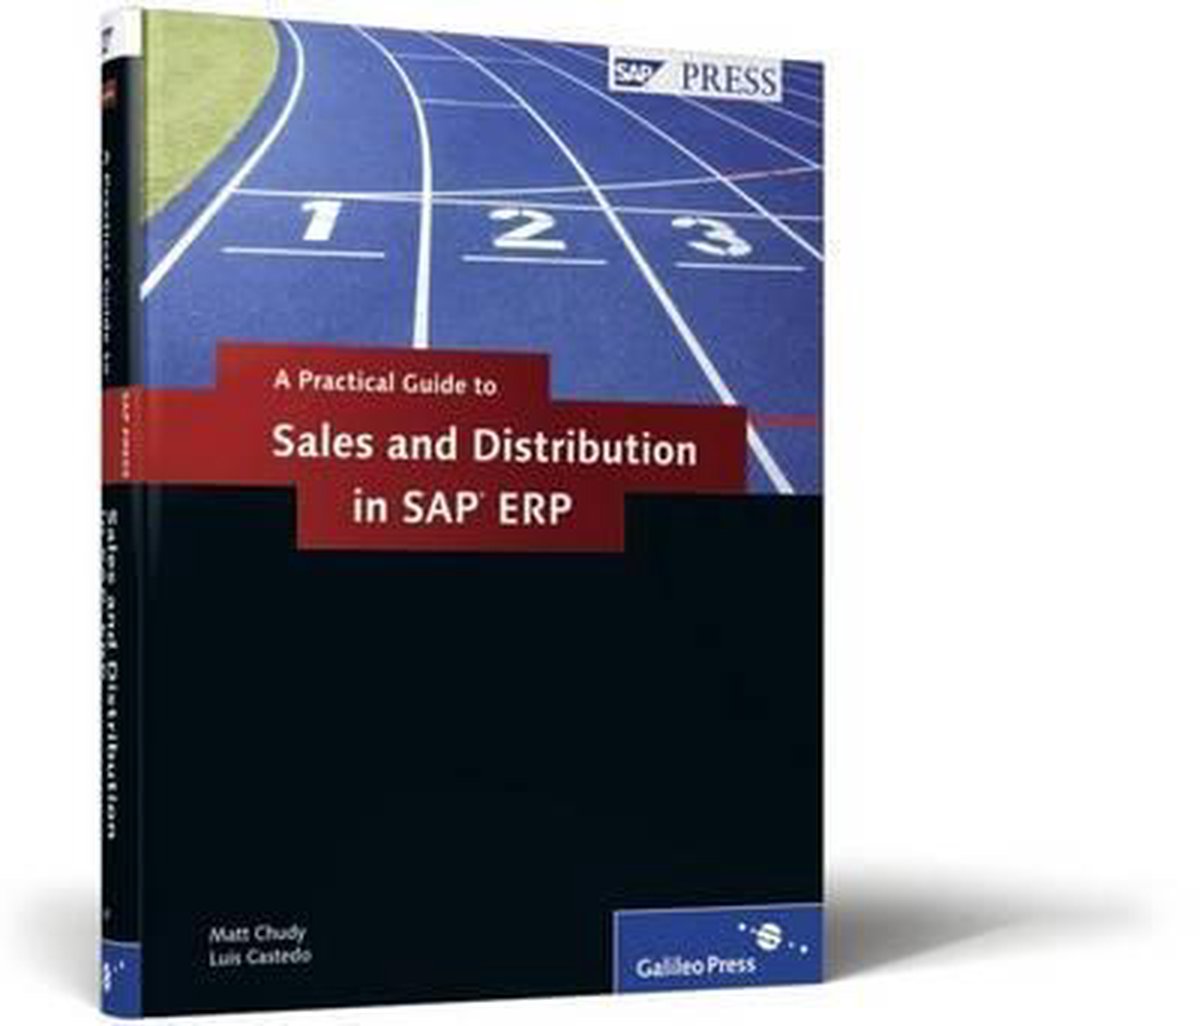 Sales and Distribution in SAP ERP - Practical Guide